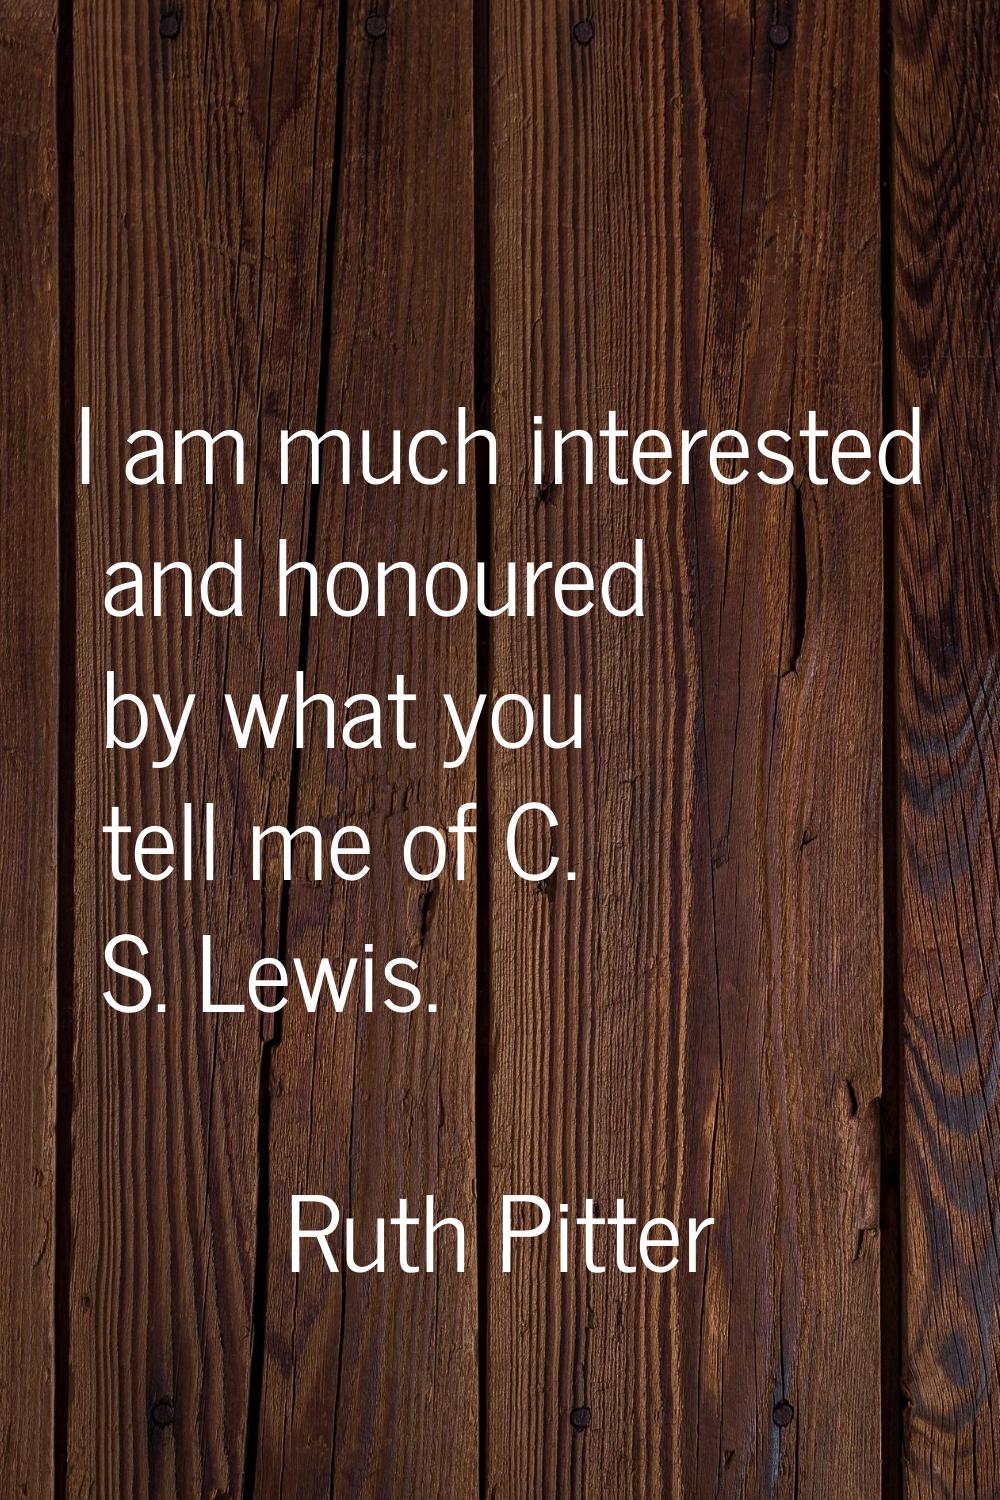 I am much interested and honoured by what you tell me of C. S. Lewis.